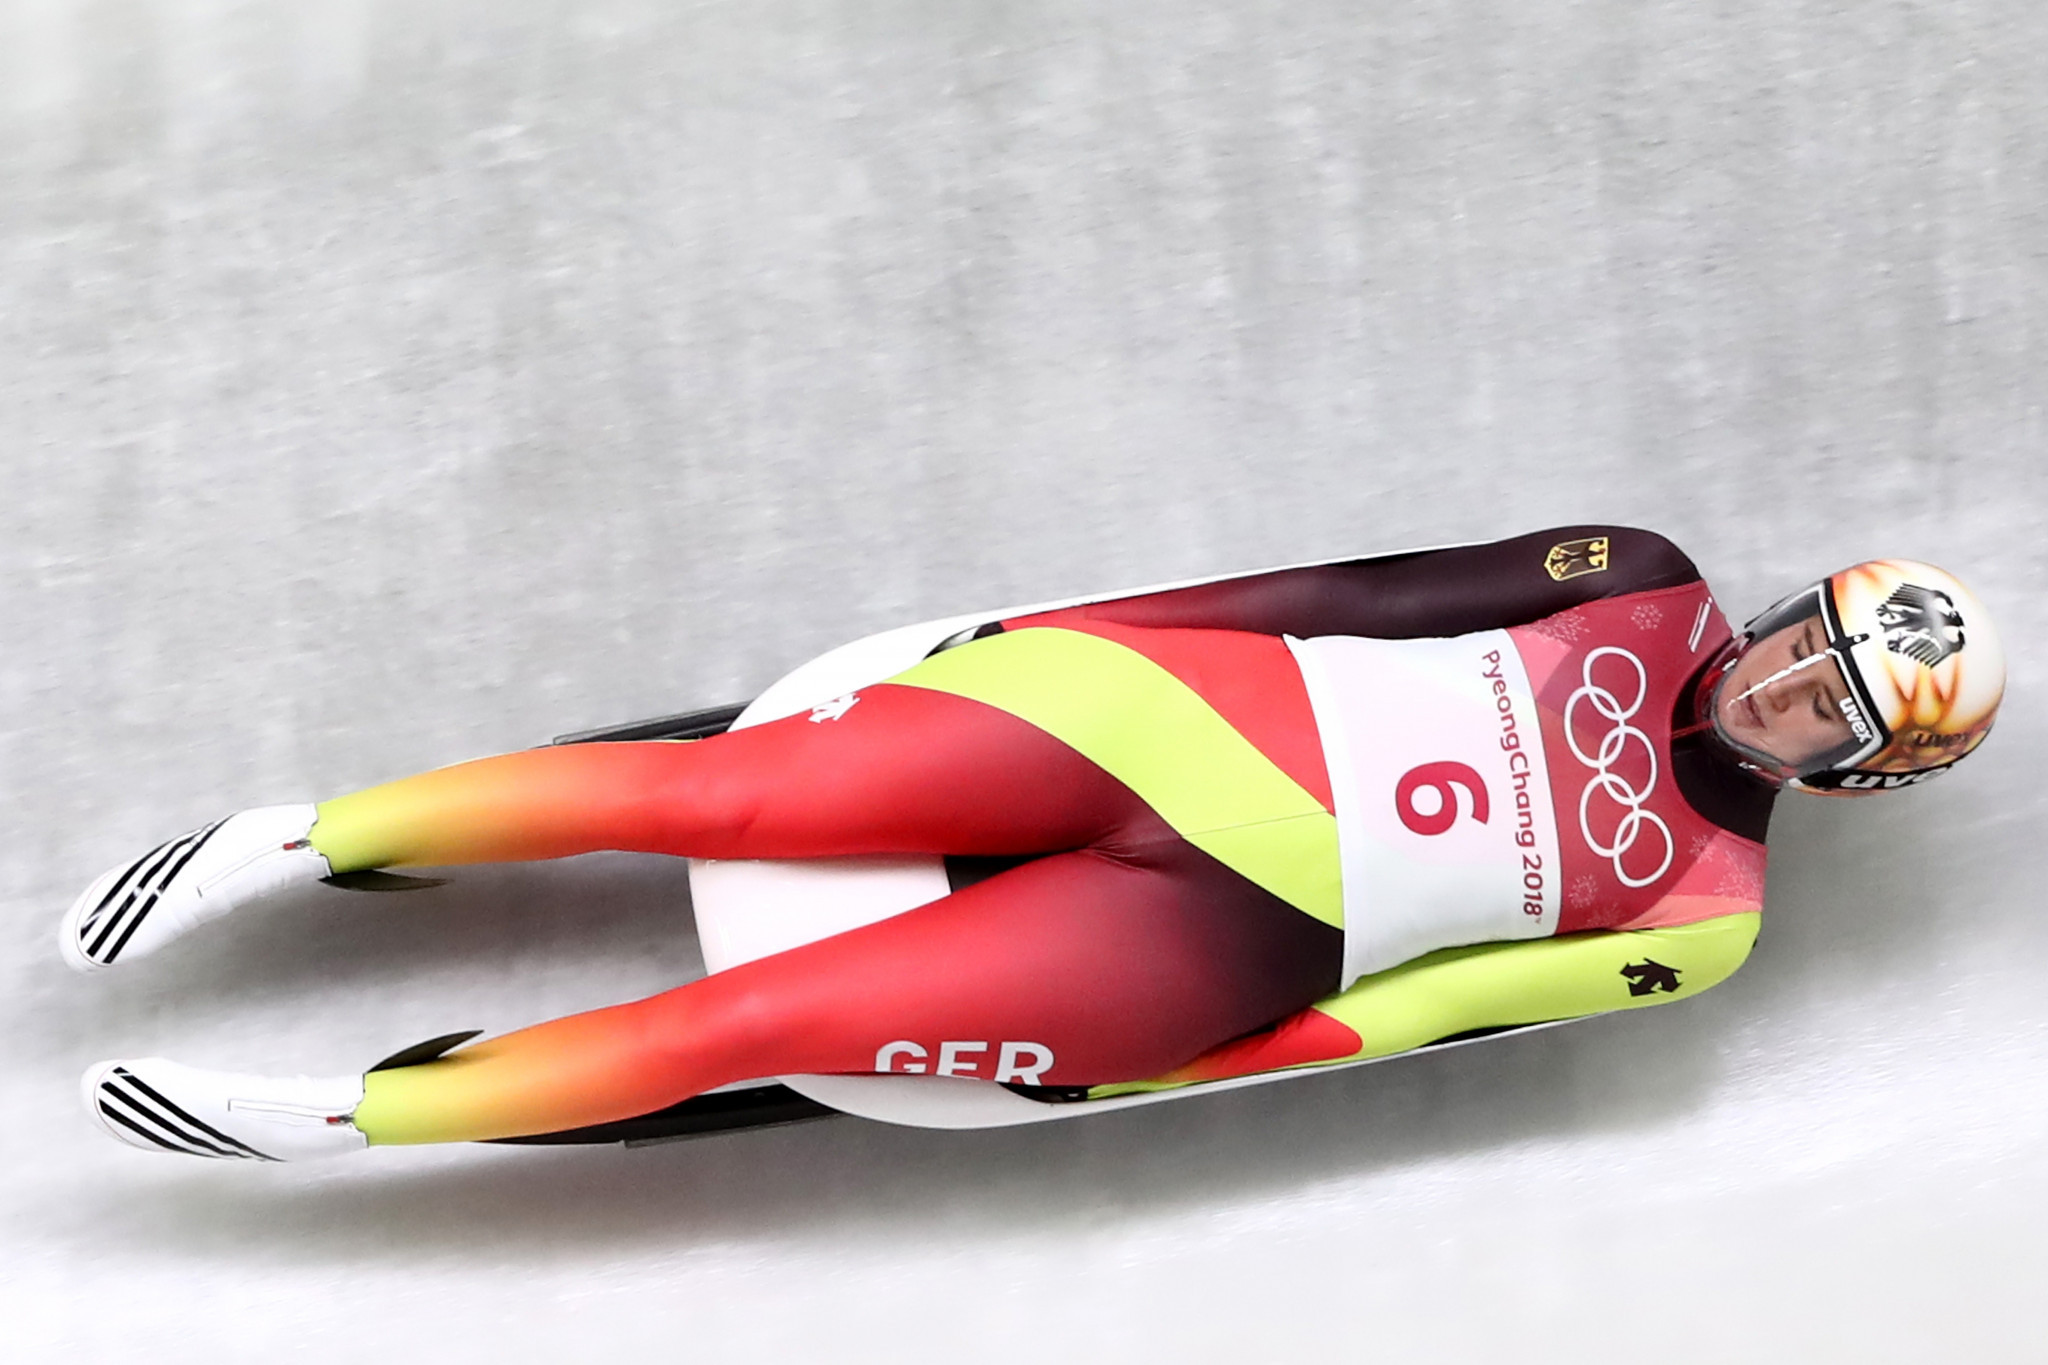 Four-time Olympic champion Natalie Geisenberger of Germany will hope to maintain her perfect start to the Luge World Cup season ©Getty Images